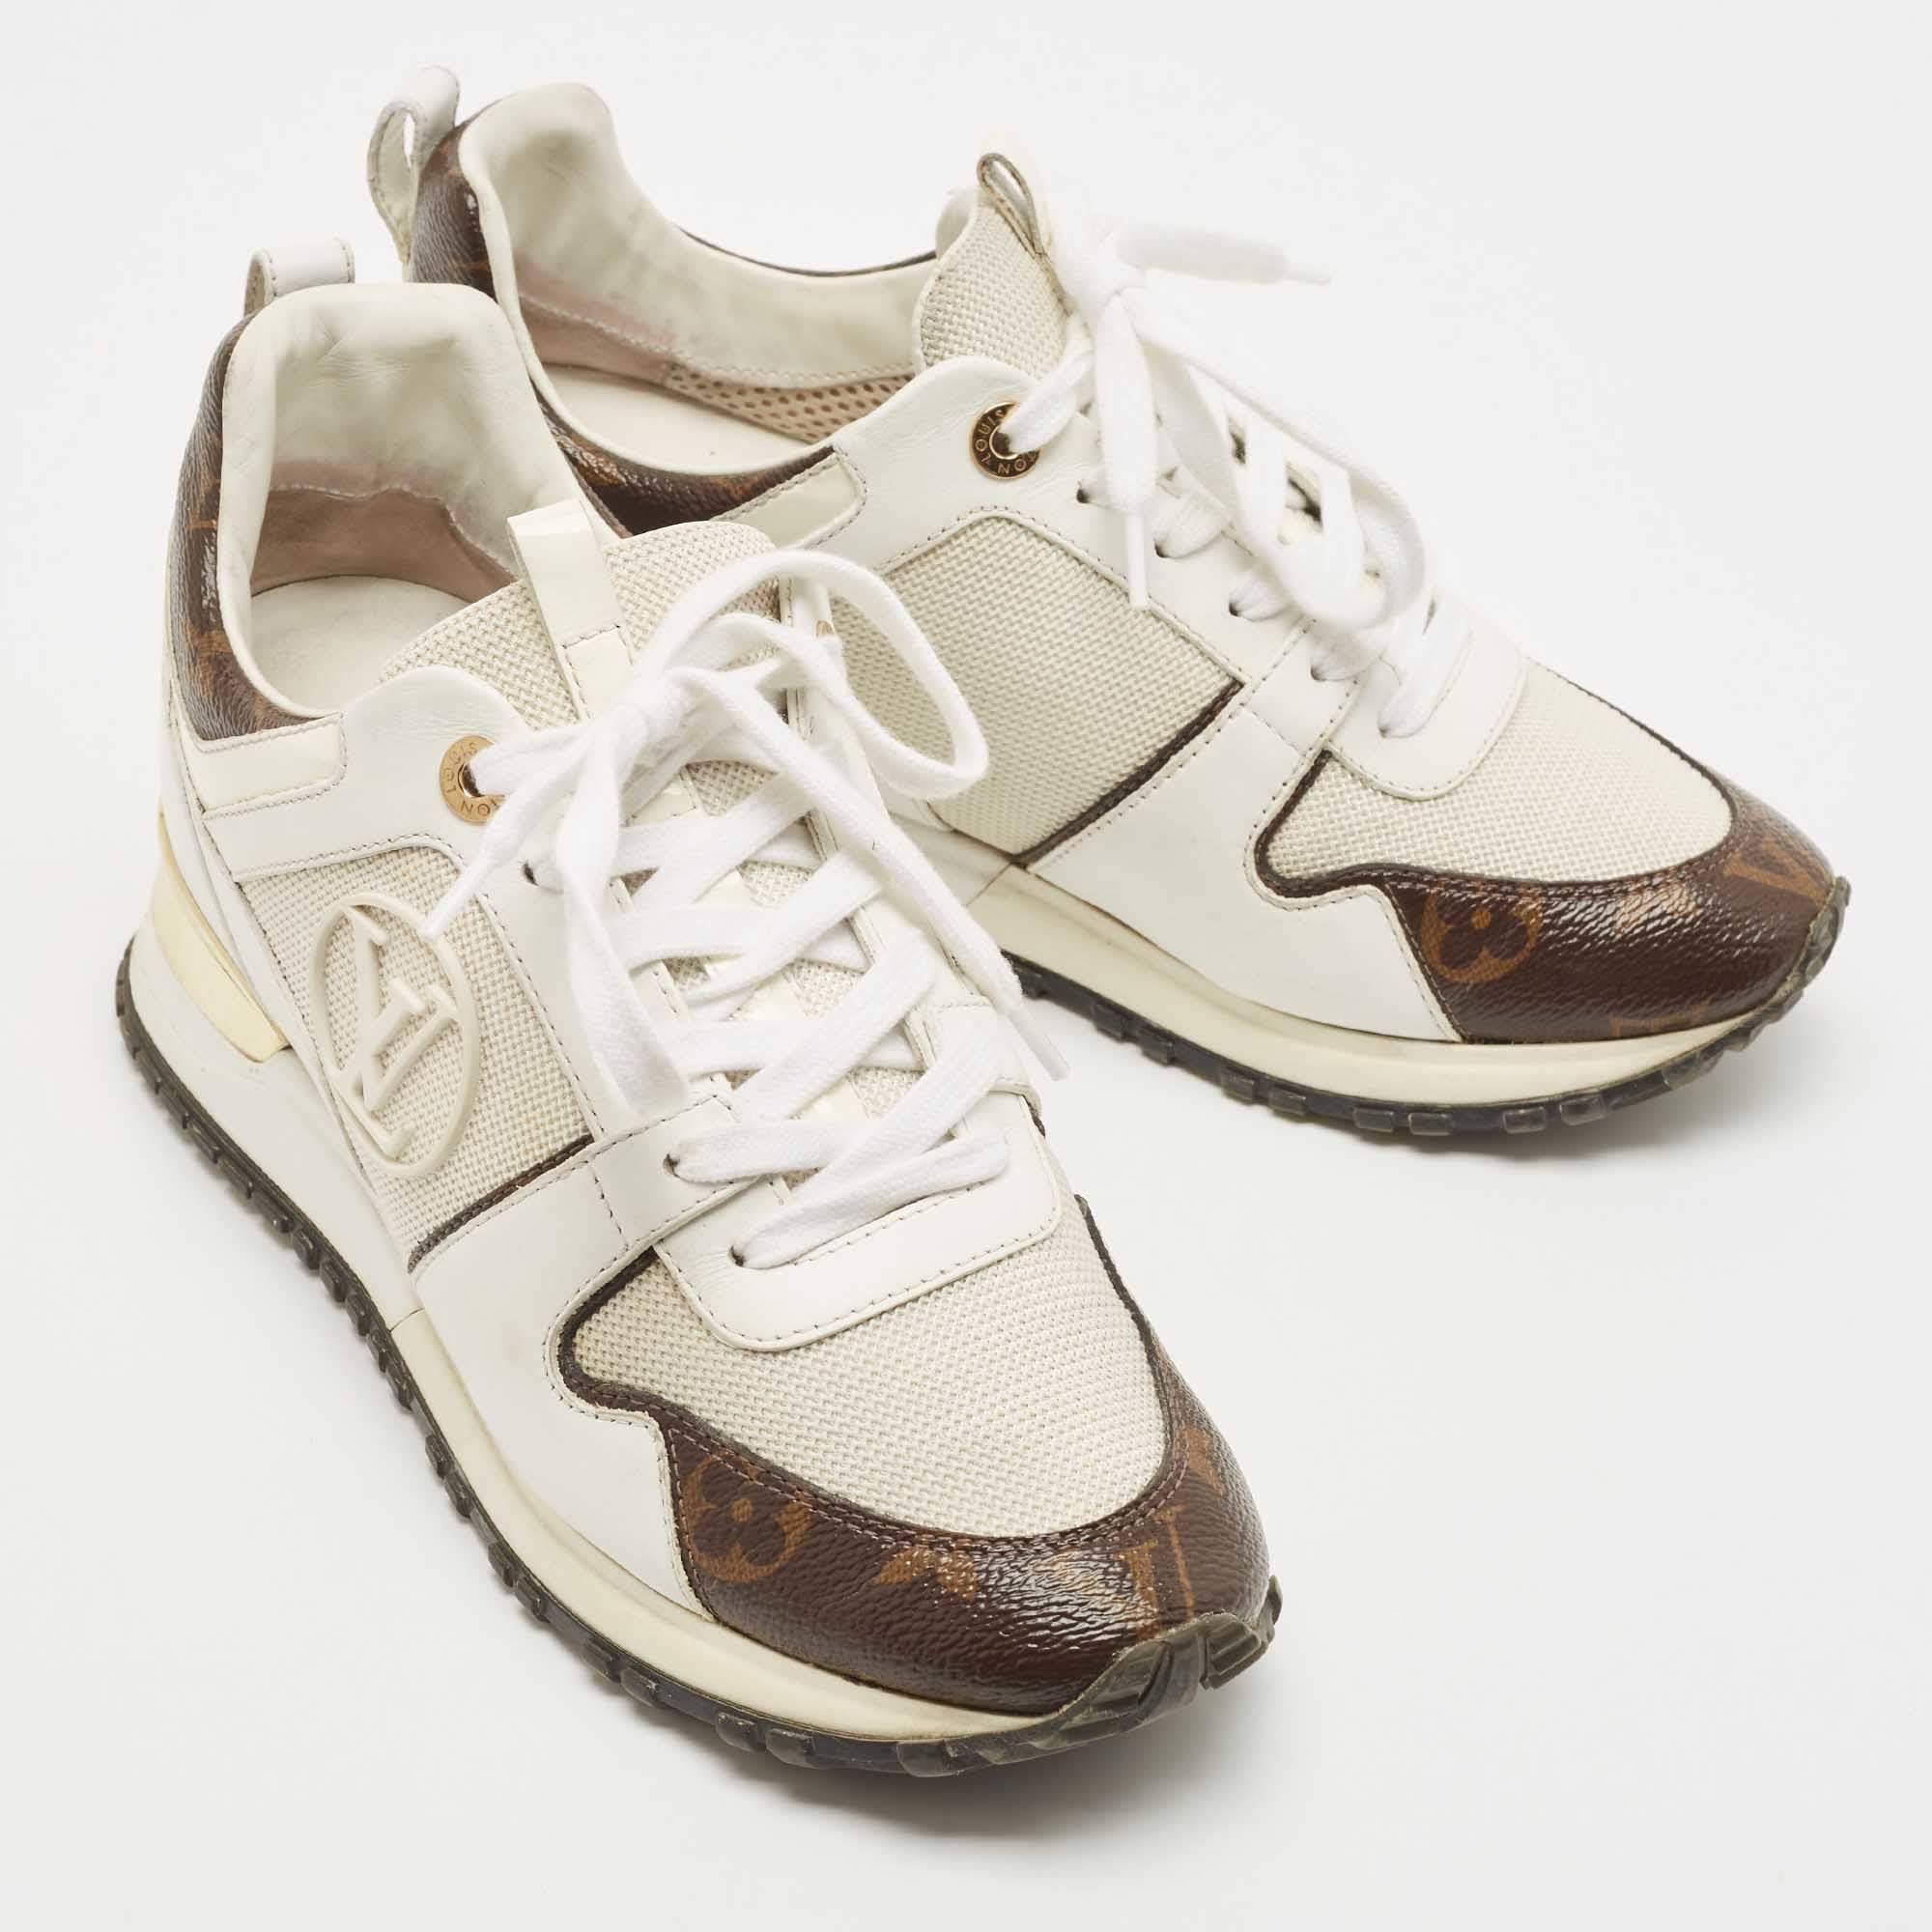 Run away leather trainers Louis Vuitton White size 36.5 EU in Leather -  35944824